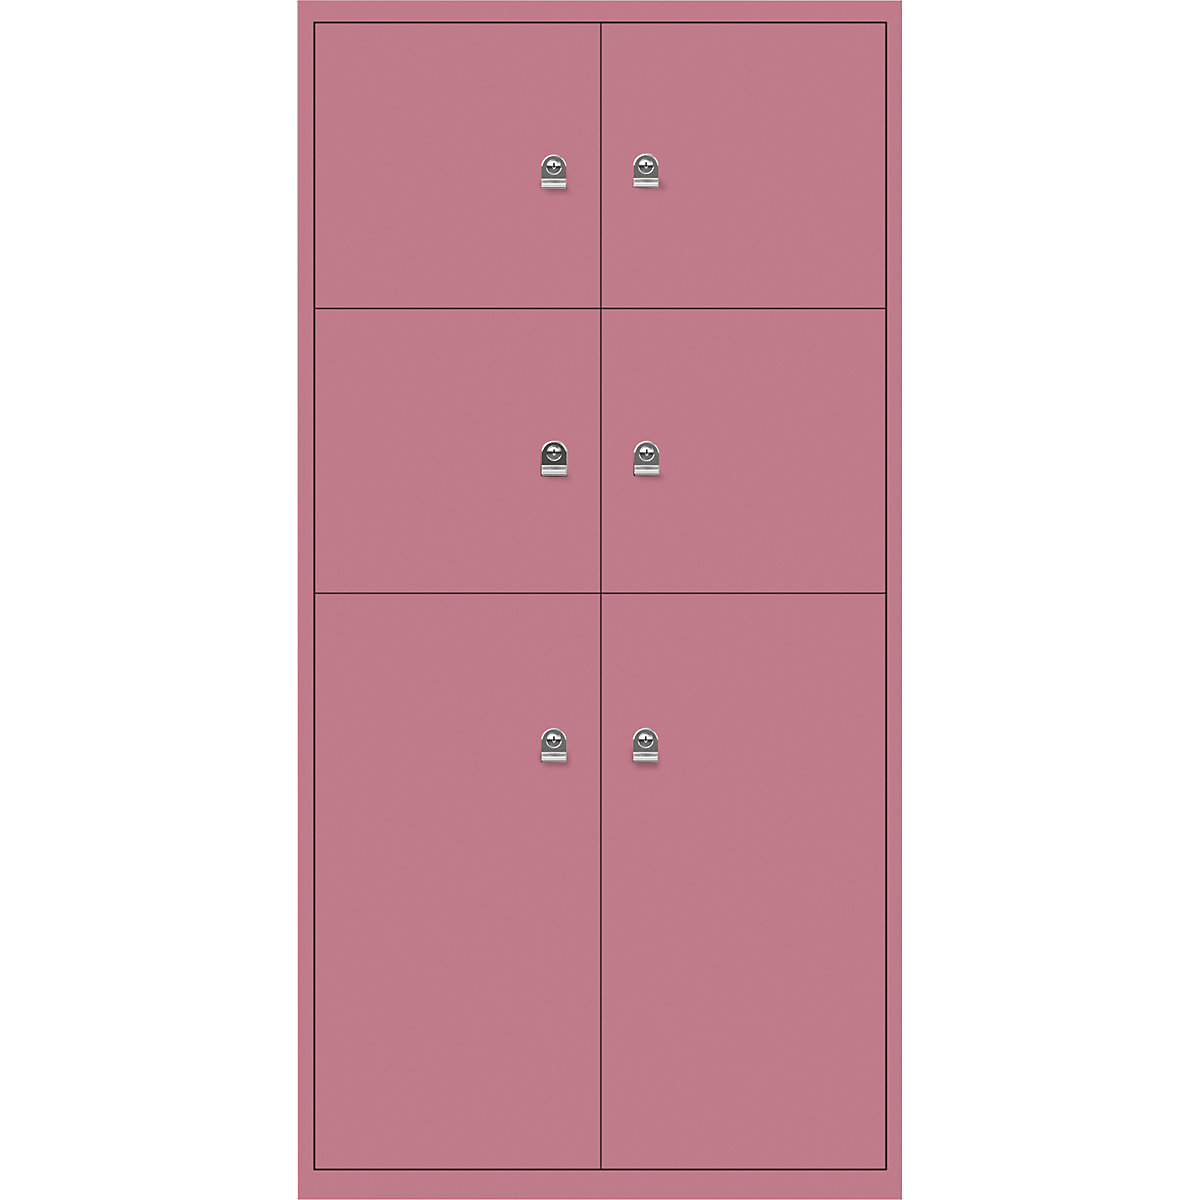 LateralFile™ lodge – BISLEY, with 6 lockable compartments, height 4 x 375 mm, 2 x 755 mm, pink-23